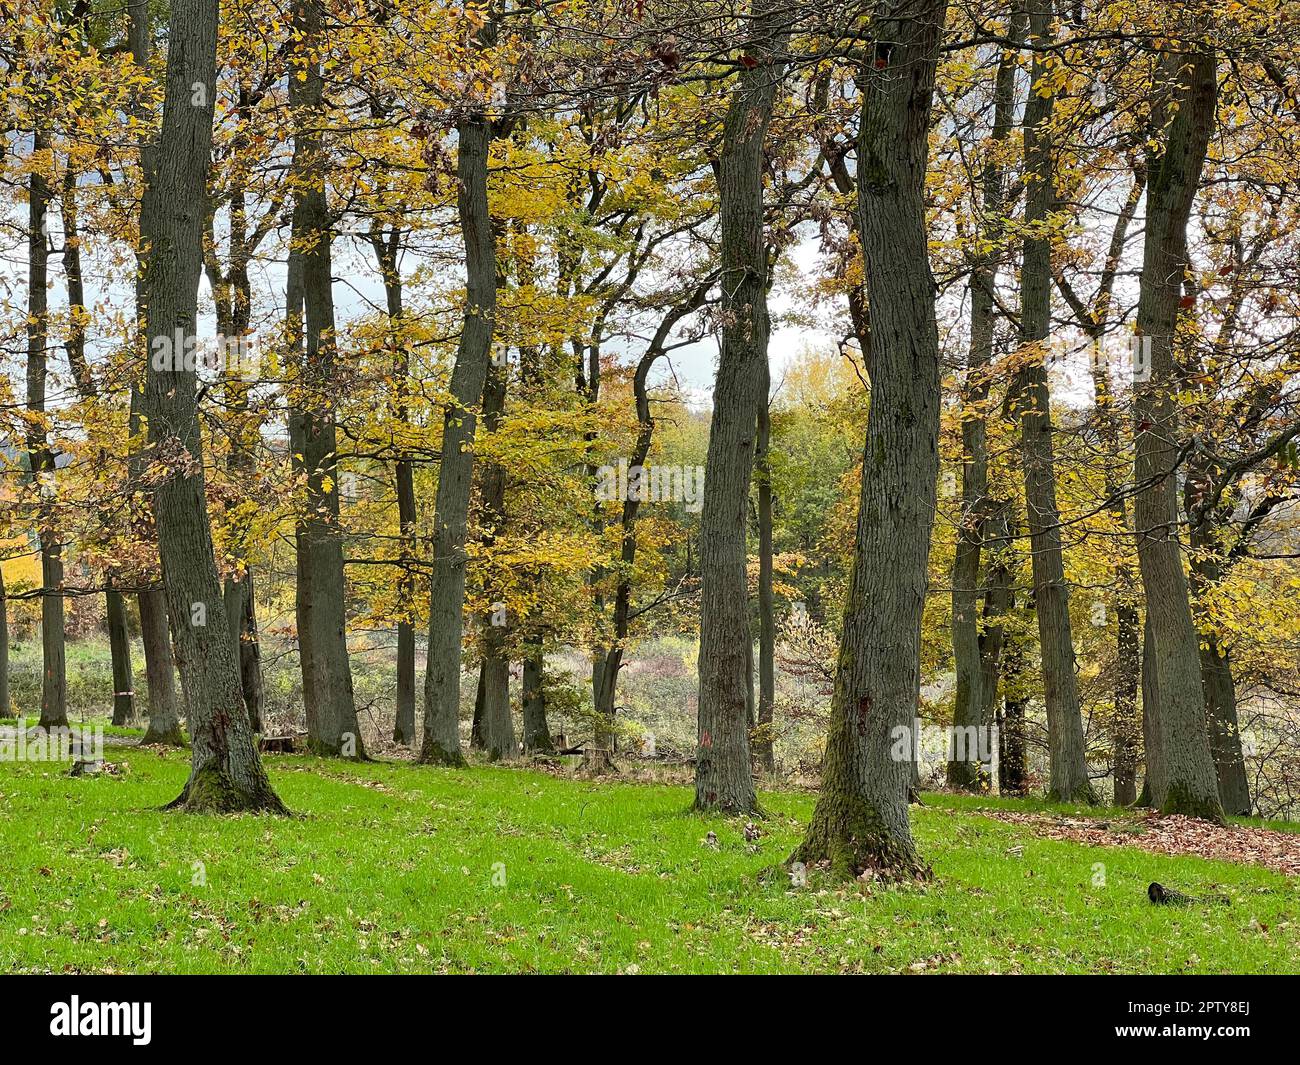 Herbstwald, Herbstimpression im Wald mit bunten Blaettern. Autumn forest, autumn impression in the forest with colorful leaves. Stock Photo